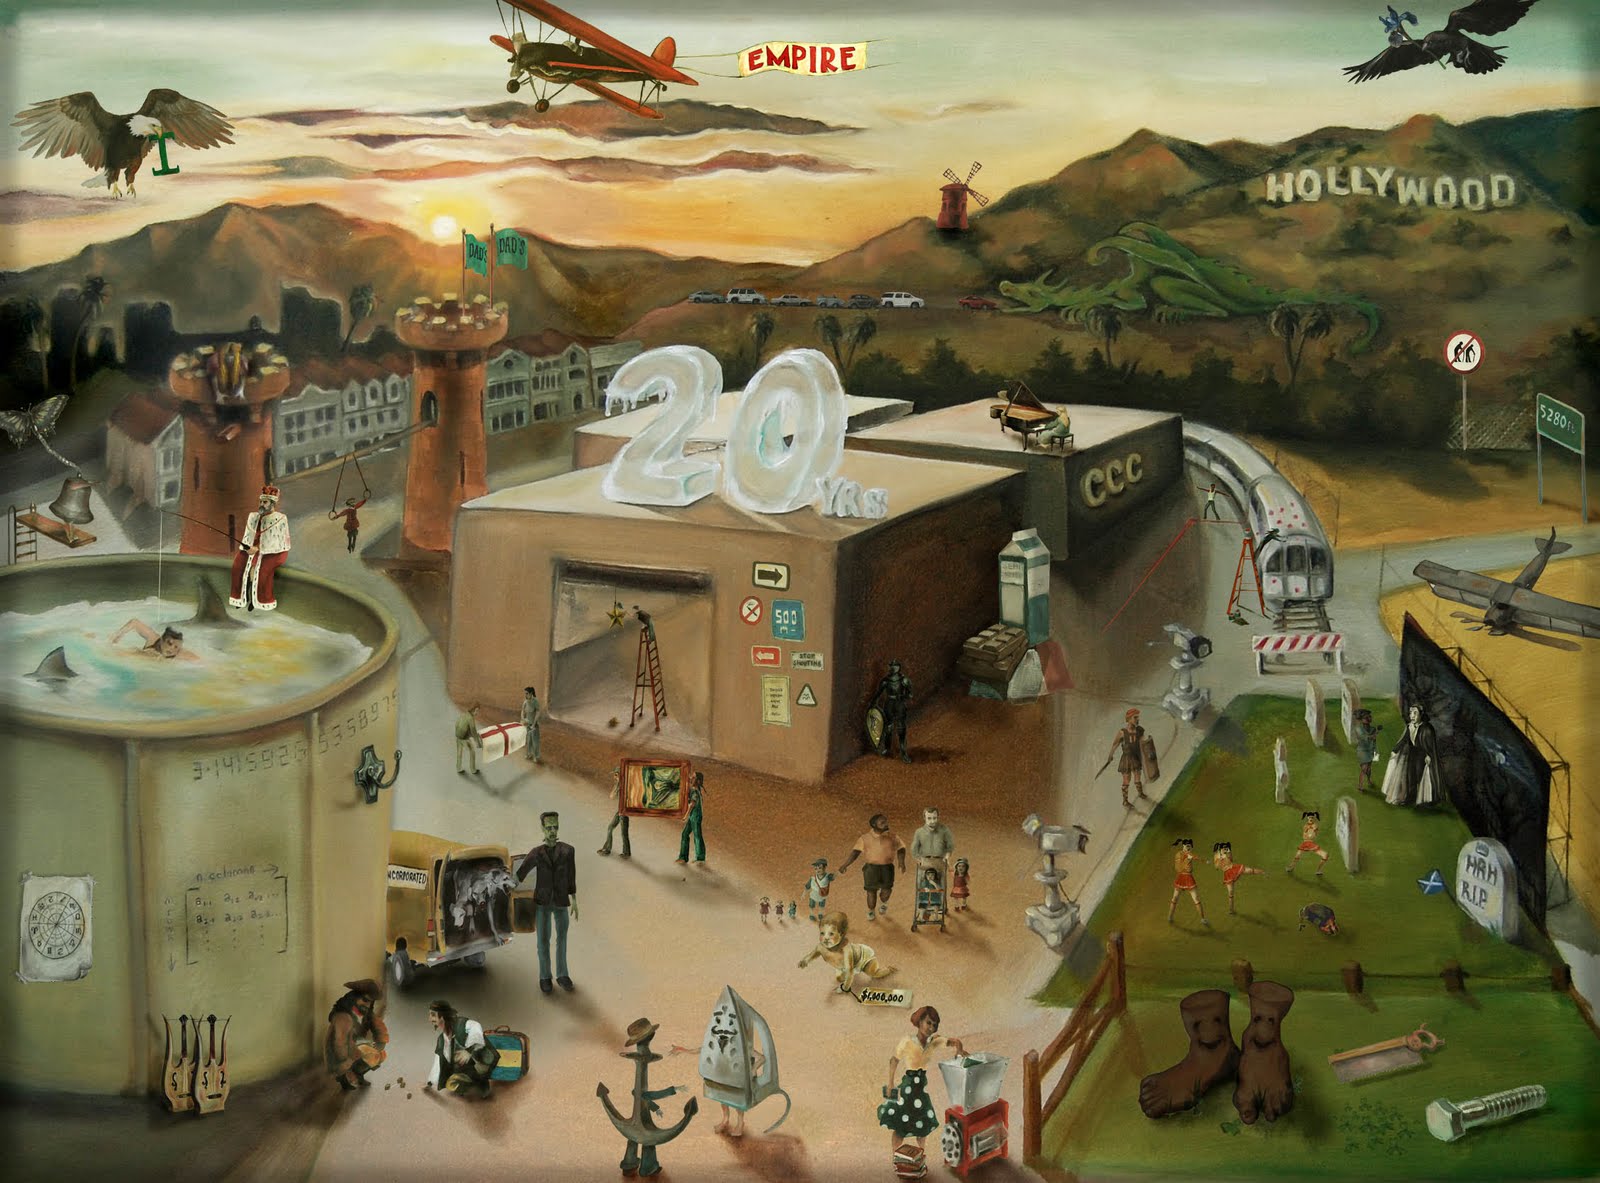 There are clues to the names of 50 movies in this painting. How many can you find?